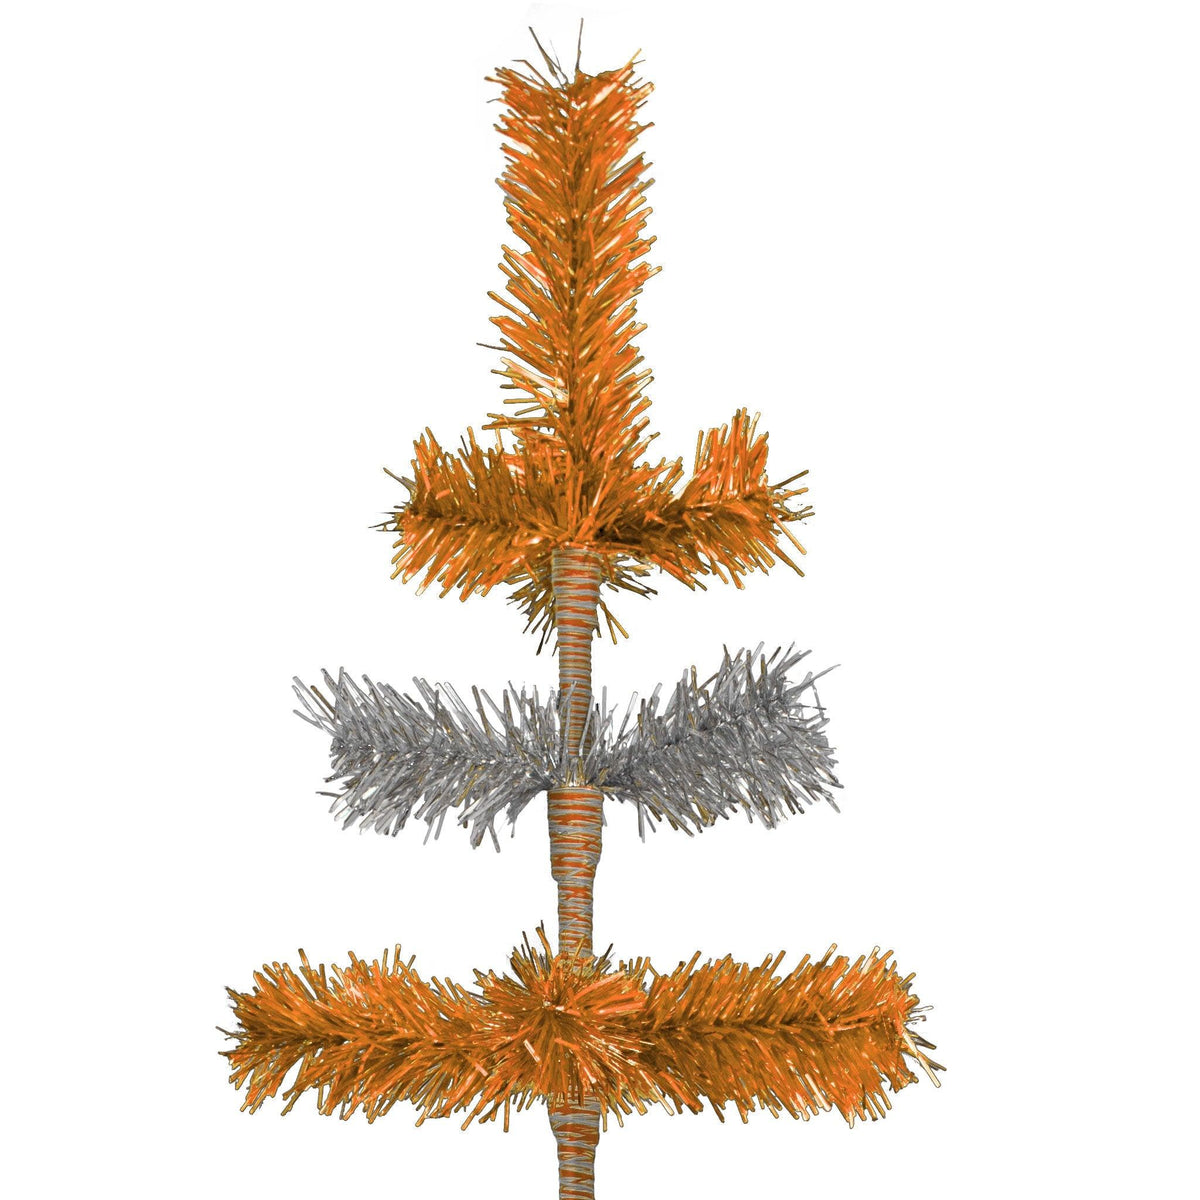 48in Tall Orange & Silver Layered Tinsel Christmas Trees! Decorate for the holidays with a Shiny Orange and Metallic Silver retro-style Christmas Tree. On sale now at leedisplay.com